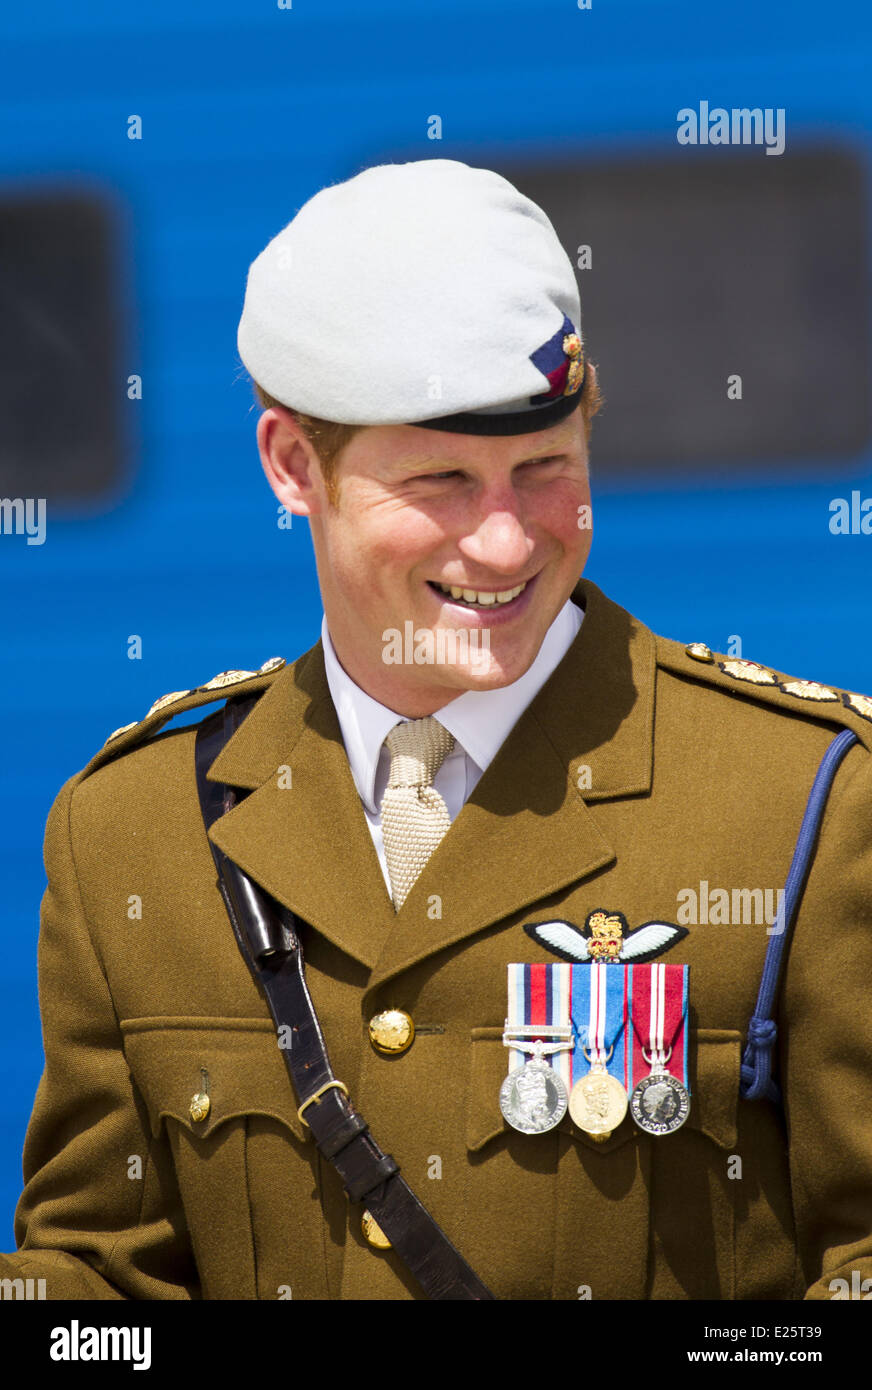 Britain's Prince Harry, Commodore-in-Chief Small Ships and Diving, visits the Royal Marines Tamar, HM Naval Base in Devonport, Plymouth. The Prince officially opened the Royal Navy's newly built centre of amphibious excellence. During the tour, Prince Harry took the parade salute, and reviewed the guard and parade of 1 Assault Squadron Royal Marines. He also attended a reception for the military personnel and their families, and joined for a unit photograph with 1 Assault Group Royal Marines  Featuring: Prince Harry of Wales Where: Plymouth, United Kingdom When: 02 Aug 2013 Stock Photo